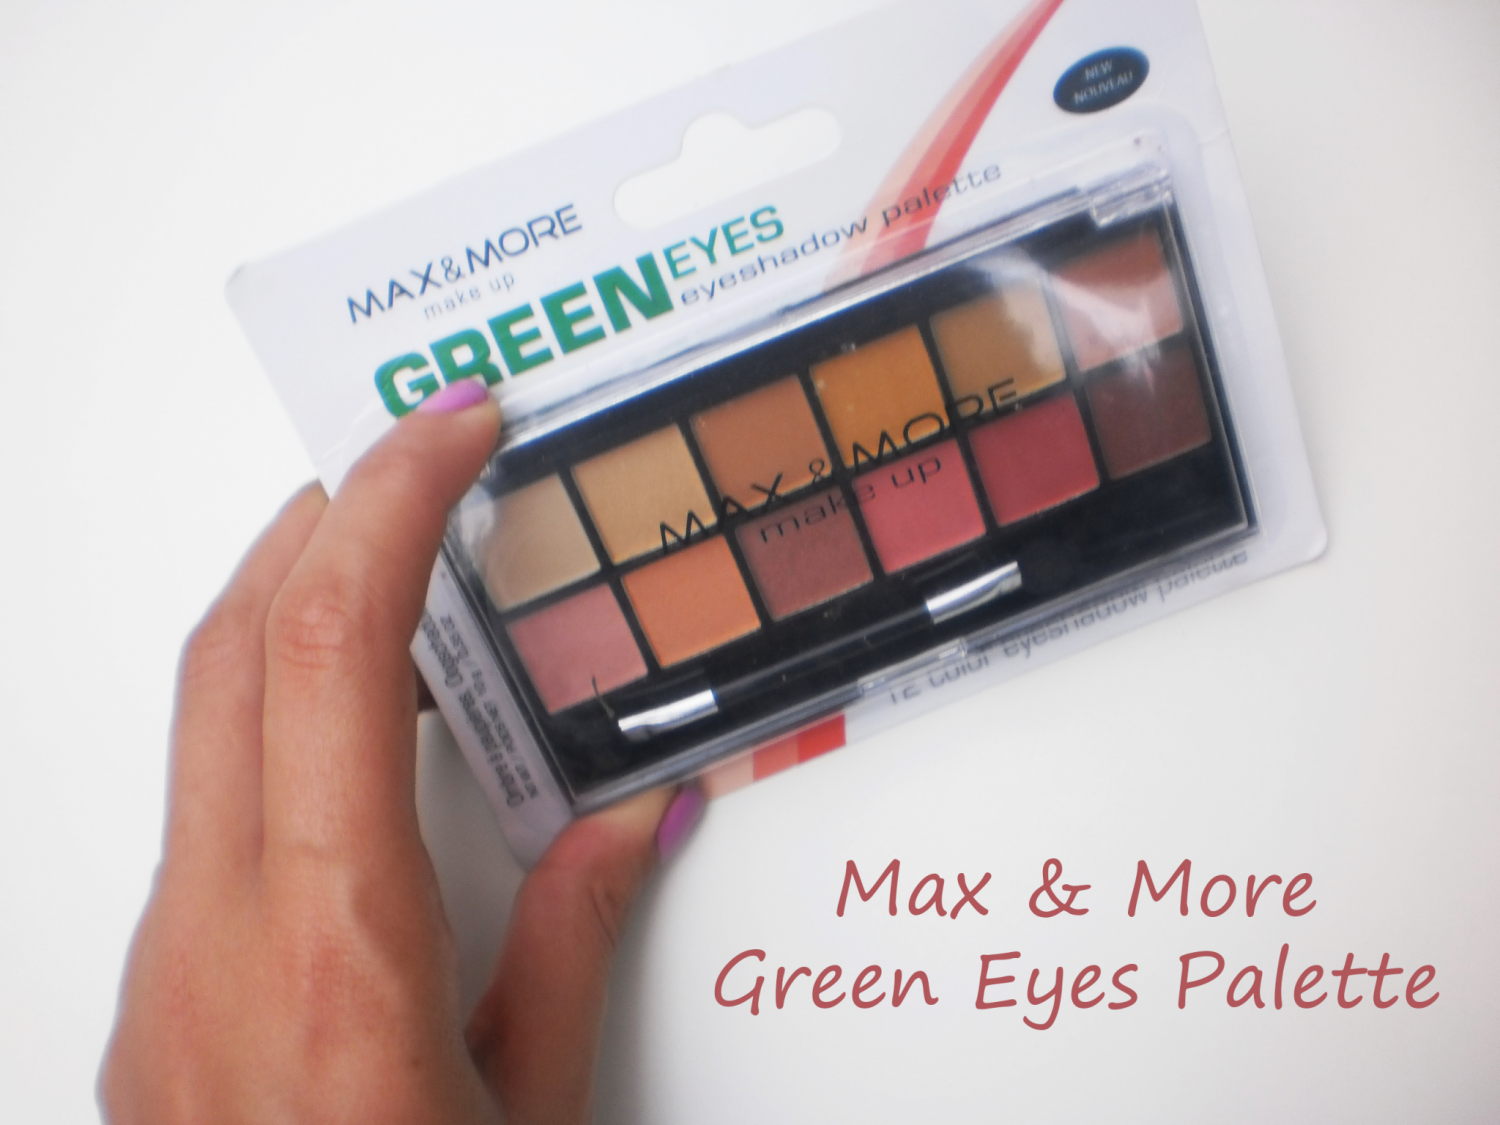 Max & More Green Eyes Palette